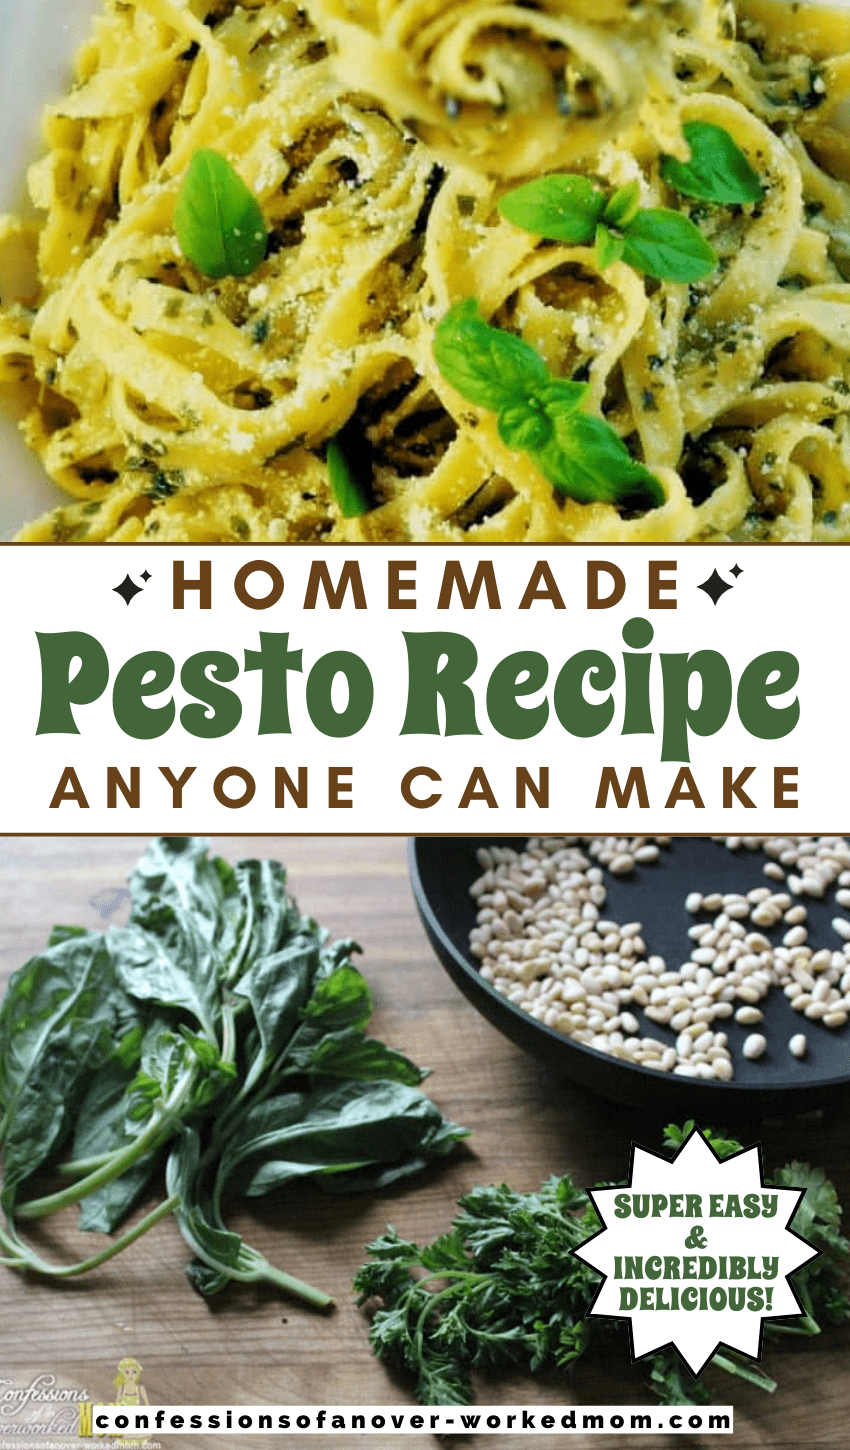 This easy pesto sauce recipe is a great choice when you are short on time at dinner. Make this simple pesto sauce recipe and have dinner on the table in just a few minutes.